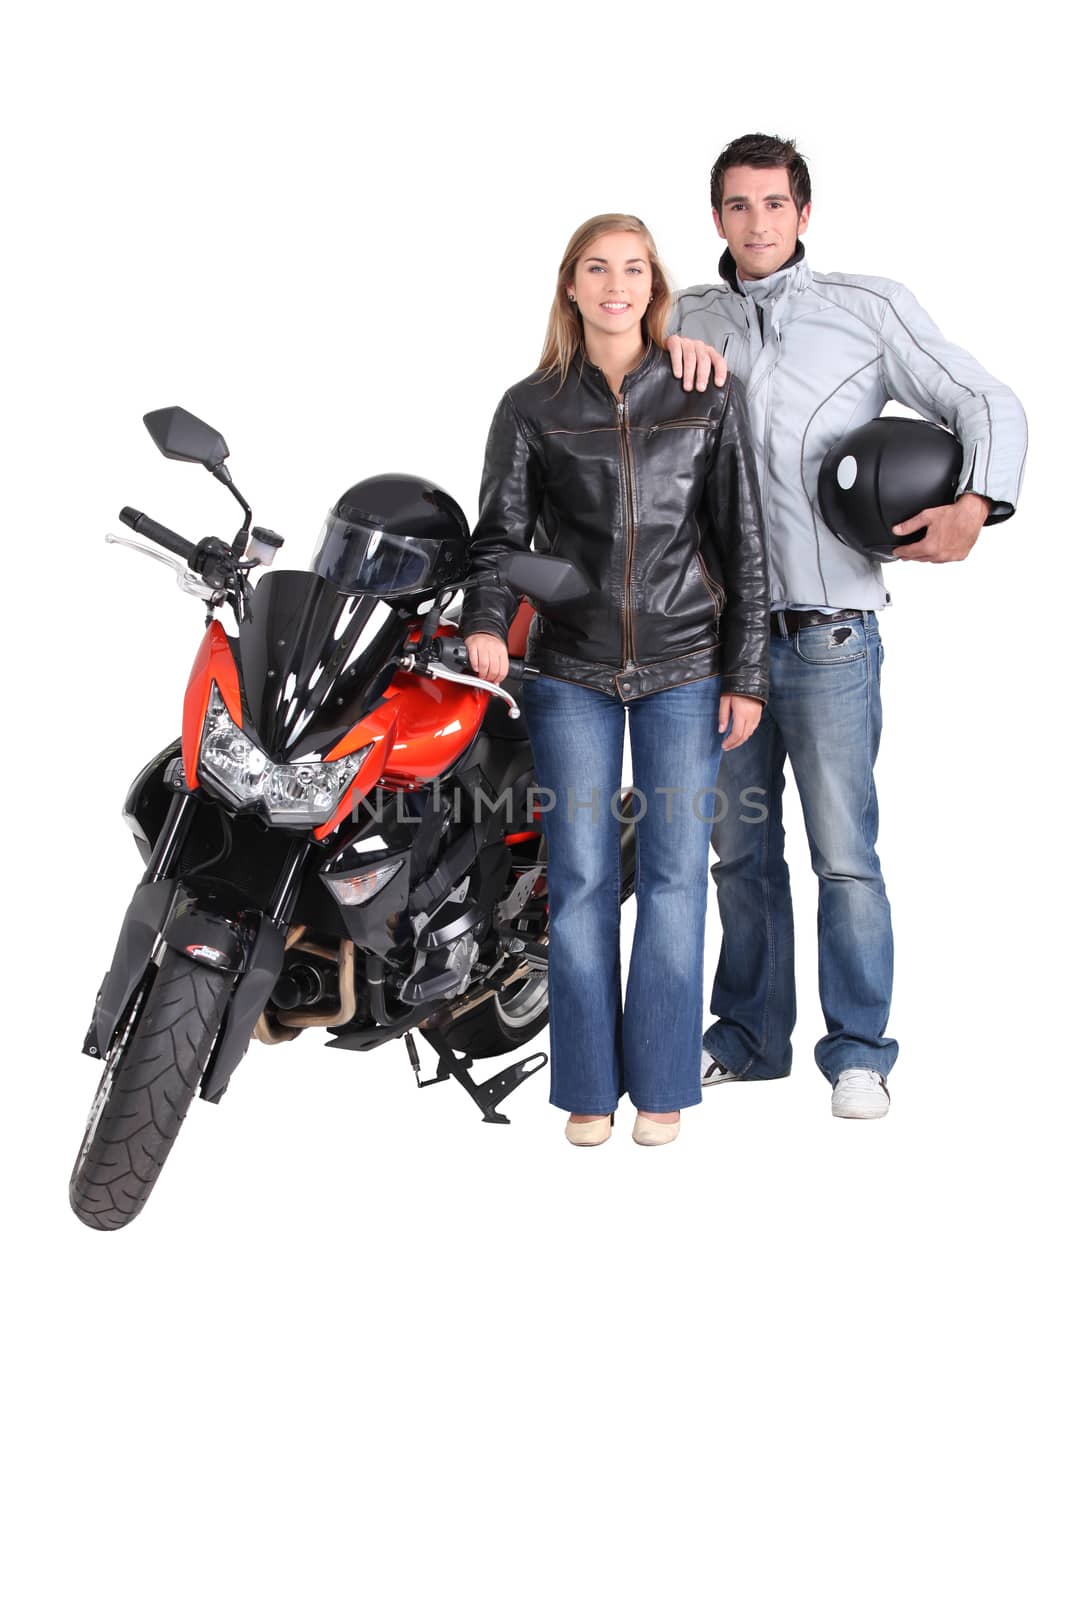 Biking couple with a red motorcycle